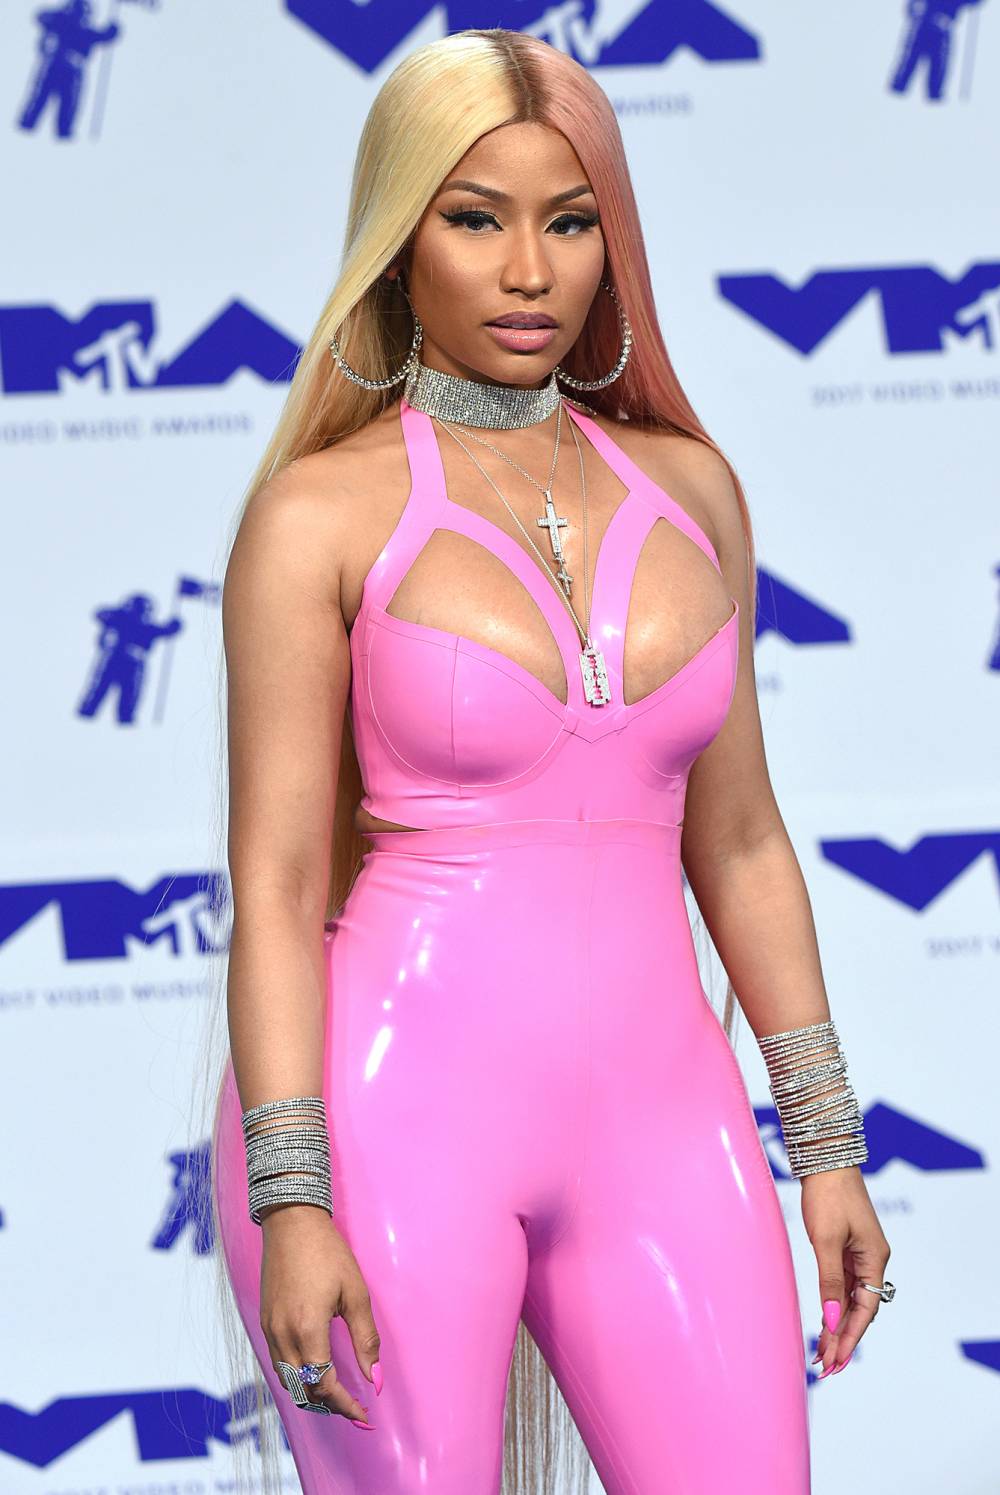 Nicki Minaj Slams Grammys for Moving 'Super Freaky Girl' From Rap to Pop Category: 'You're Not Paying Attention'